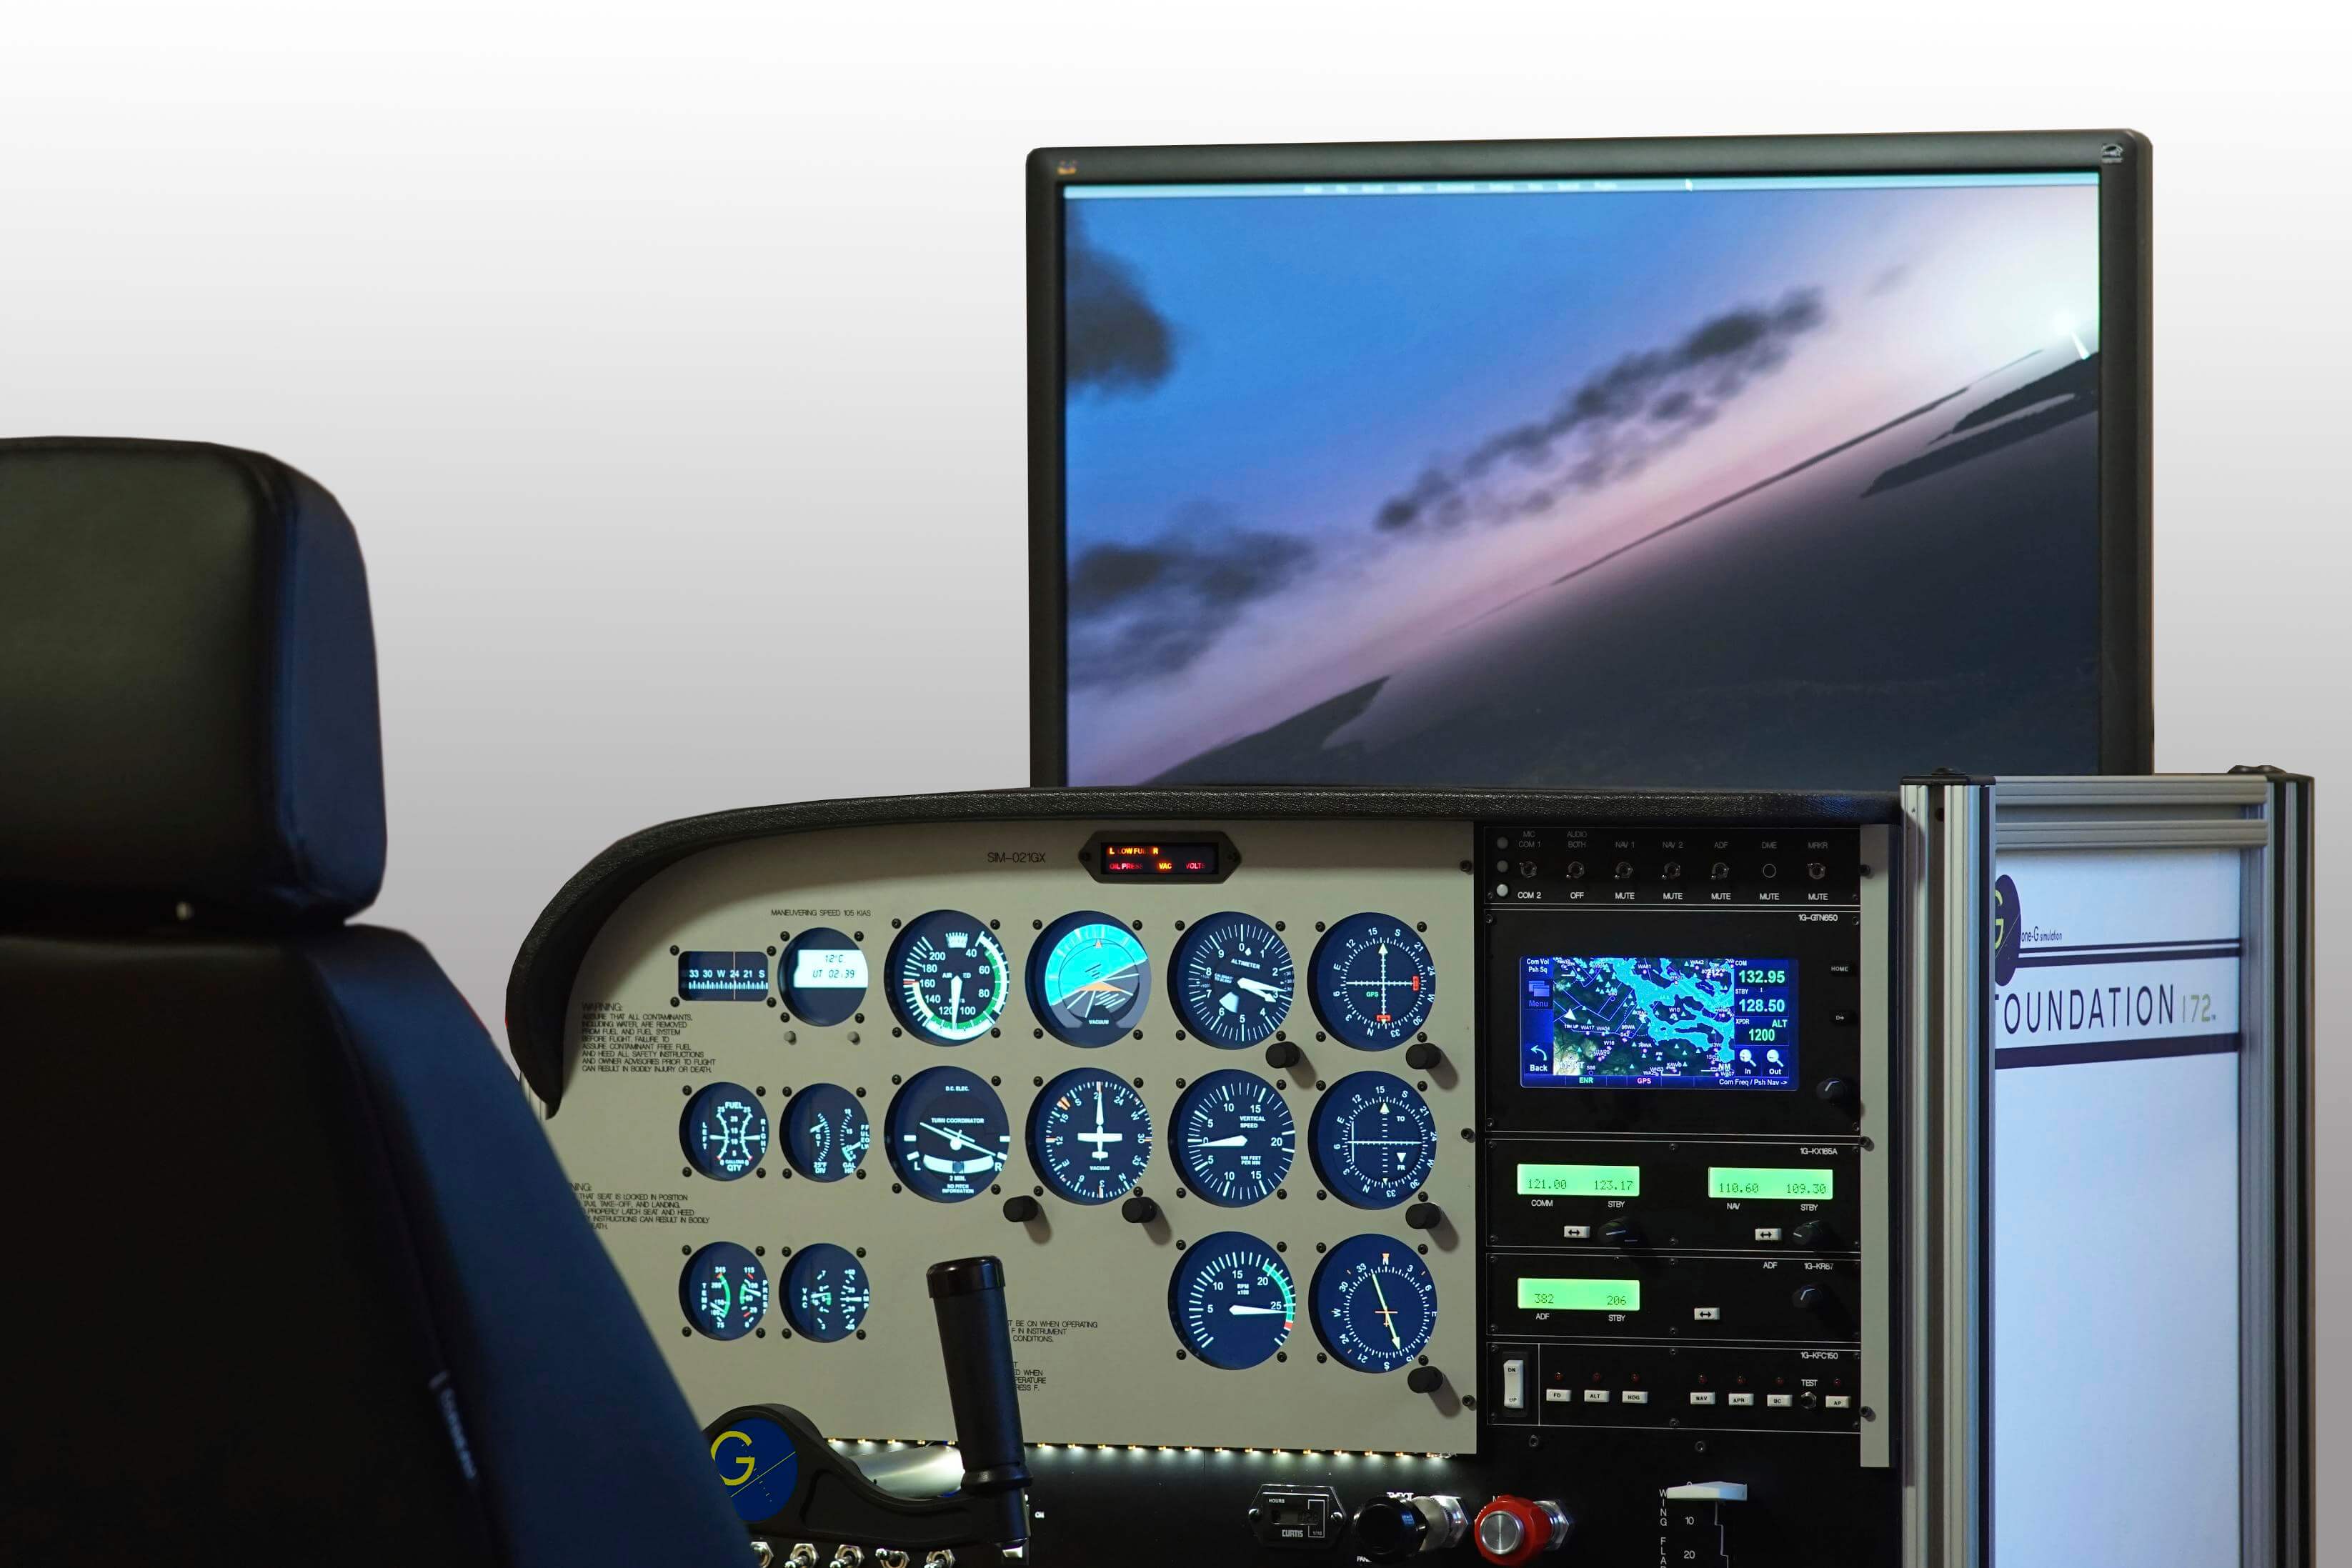 Texas A&M students create extended reality flight simulator